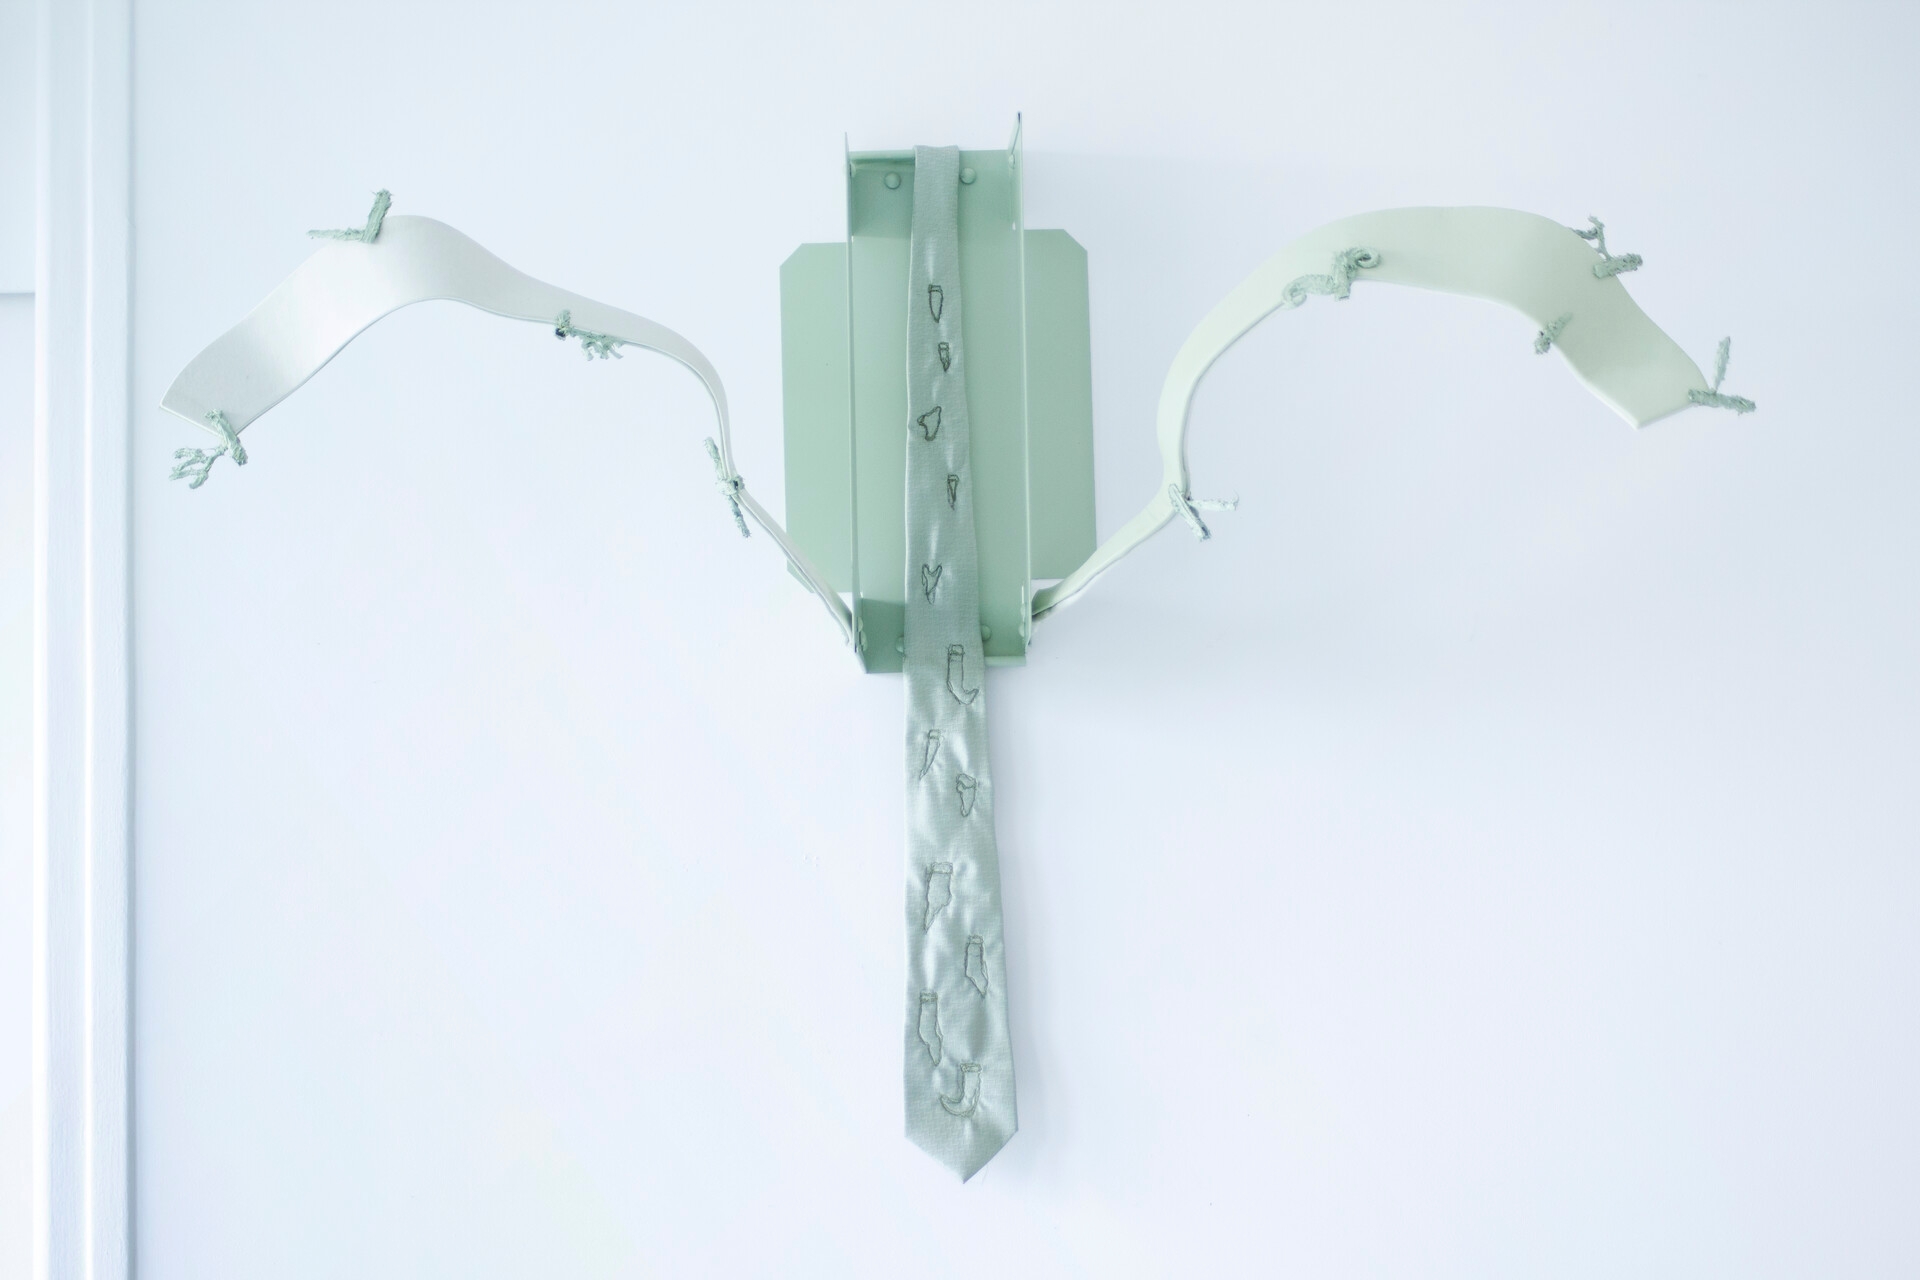 teeth and ties 2, 110×77×33cm, 2022, Acrylic paint, Fabric, Leather, Metal, Silicone, Thread